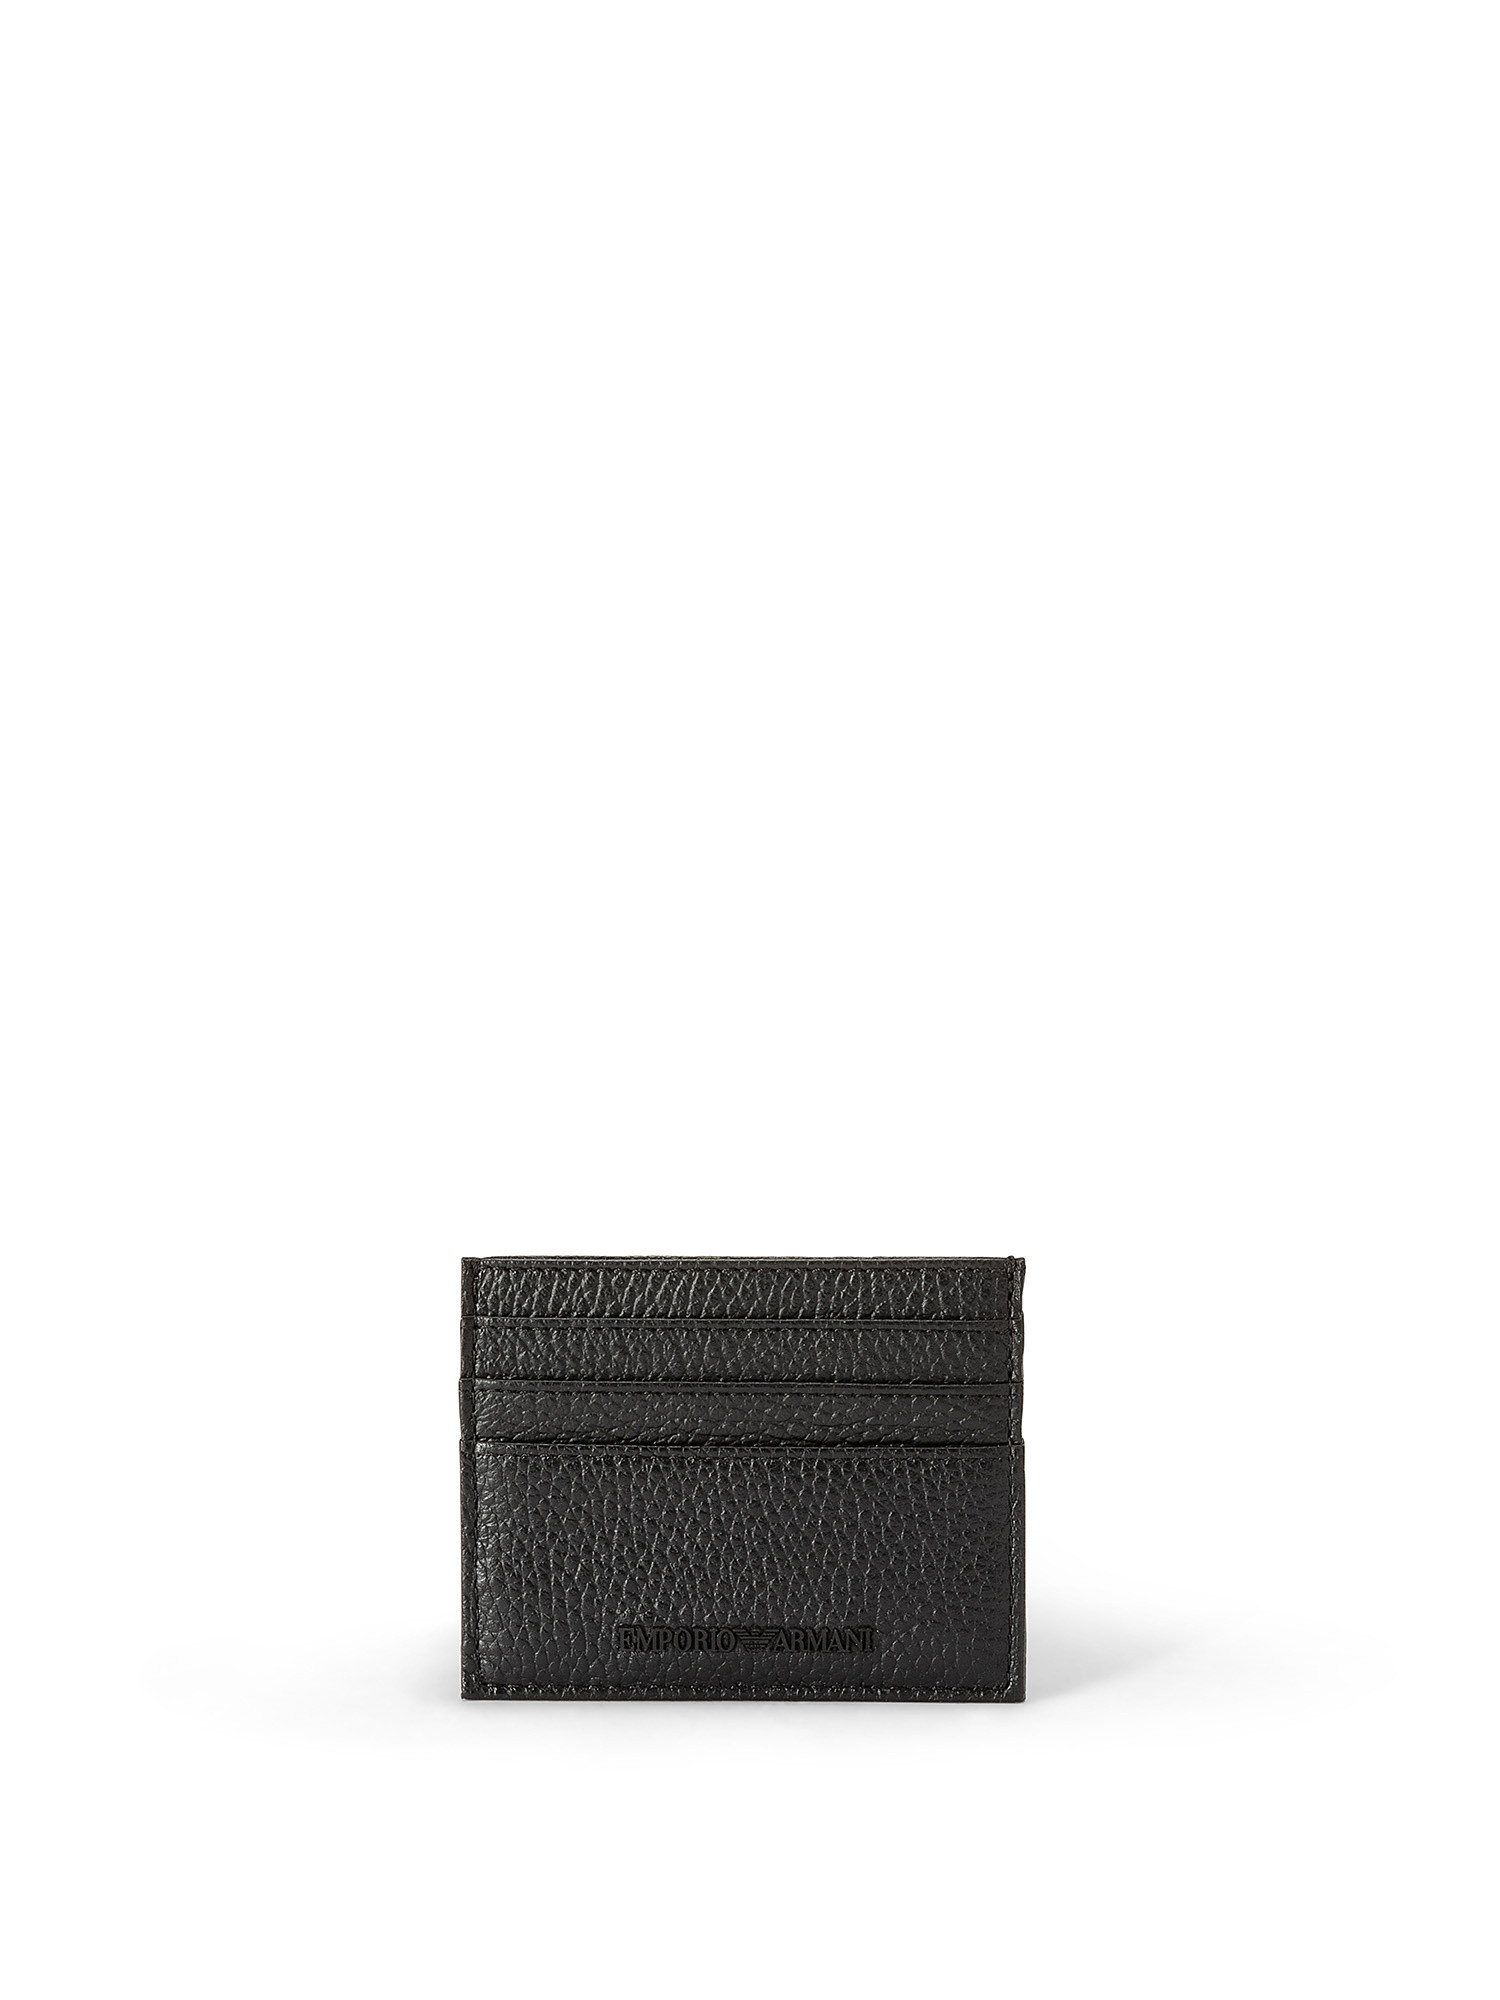 Emporio Armani - Card holder in tumbled leather, Black, large image number 0